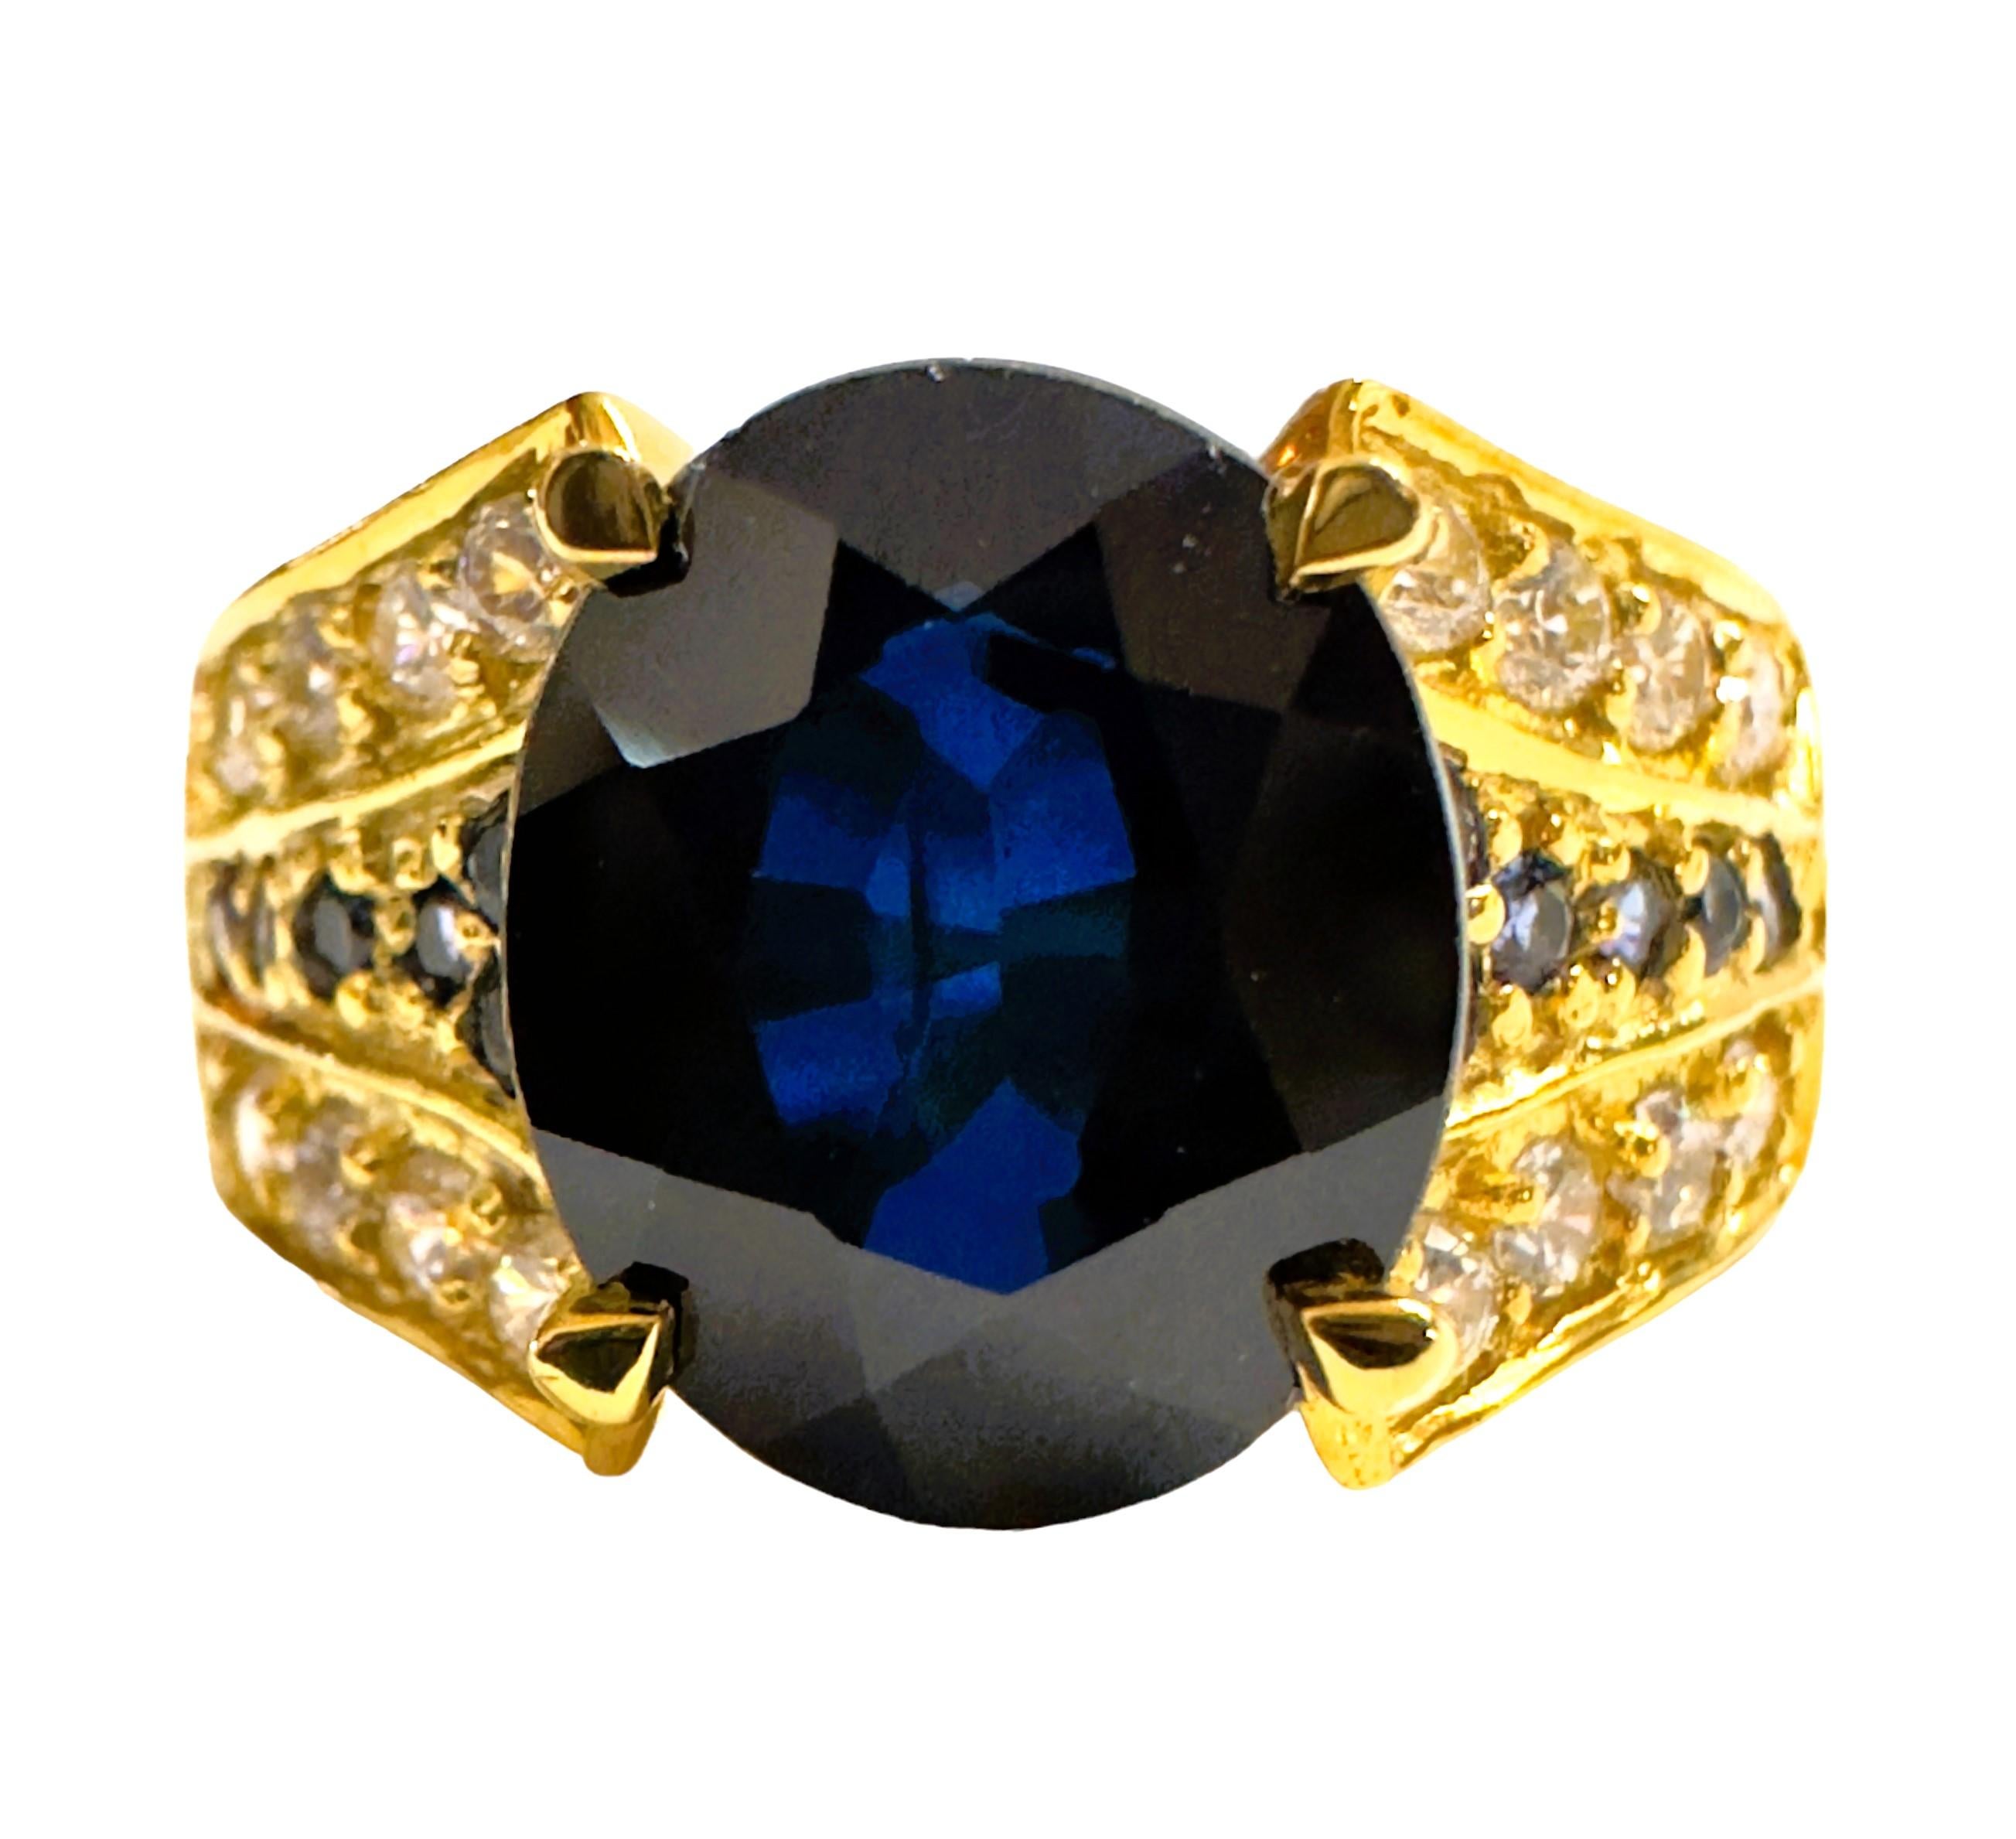 The ring is a size 7.5 and has just a beautiful and brilliant sapphire stone.  It was mined in Africa.  It is a high quality stone. The IF stands for 